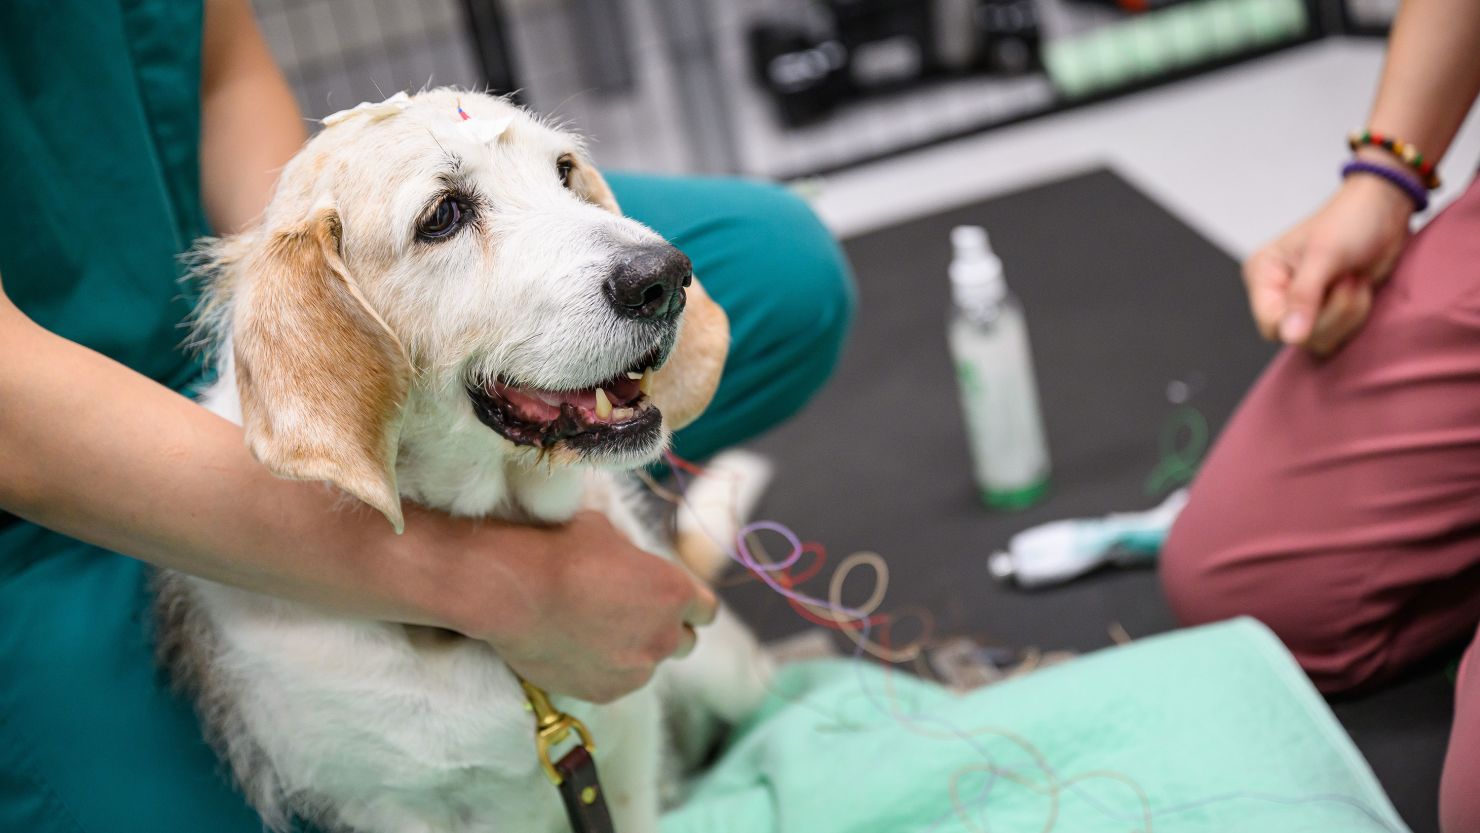 Woofus, a 15-year-old basset hound mix, does his part for science.